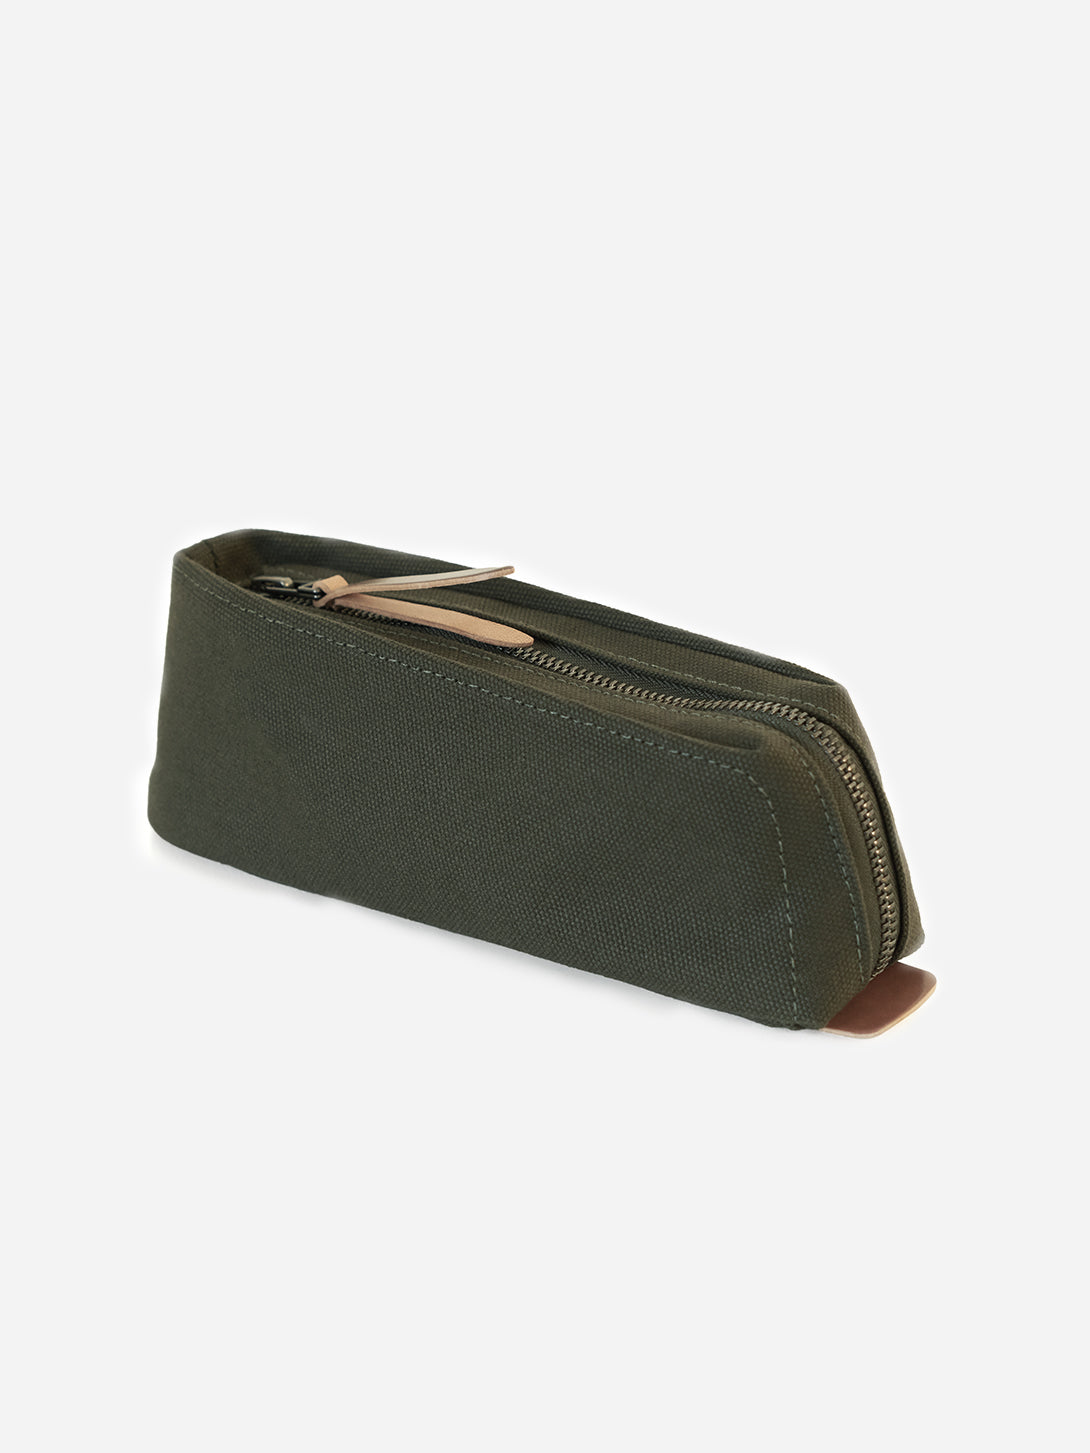 ARMY GREEN canvas pencil and pen case Makr